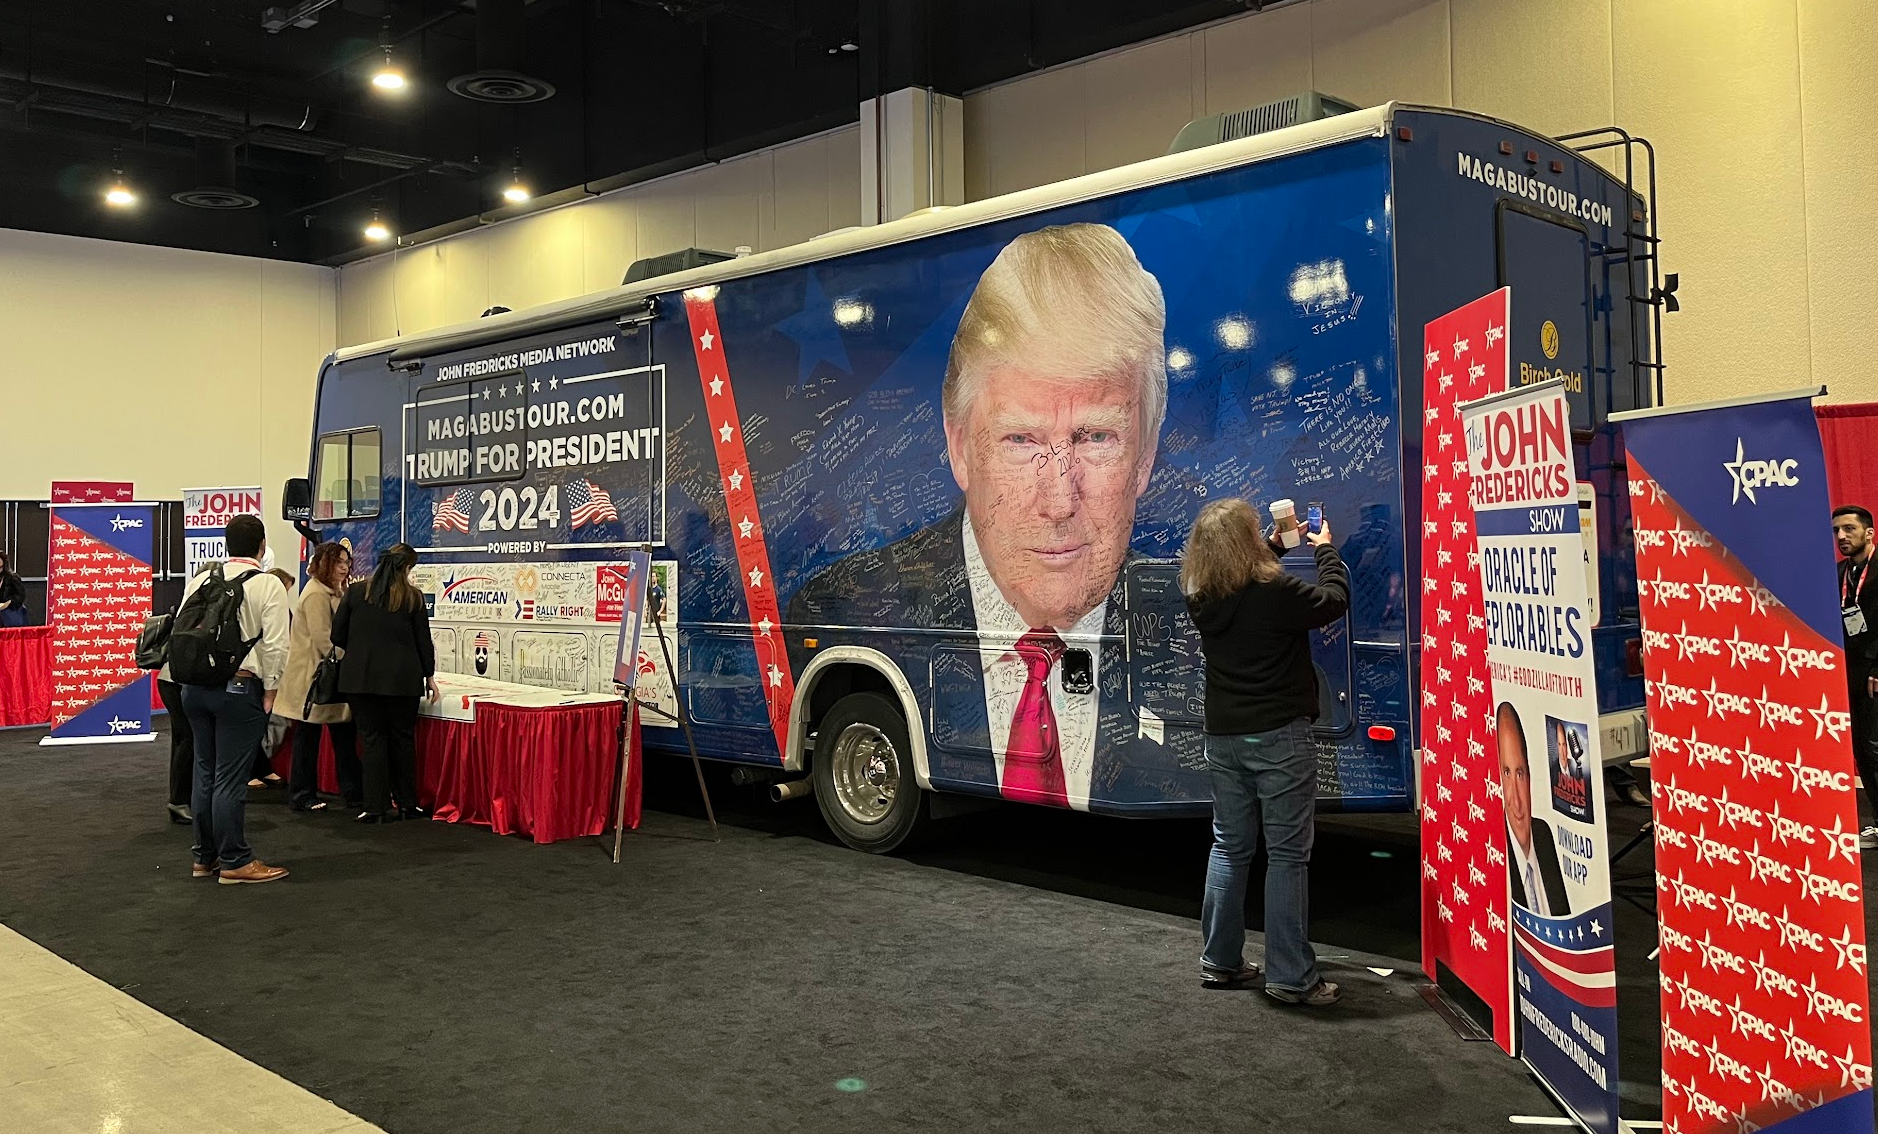 Radio host John Fredericks parked his bus in the exhibition hall for attendees to sign